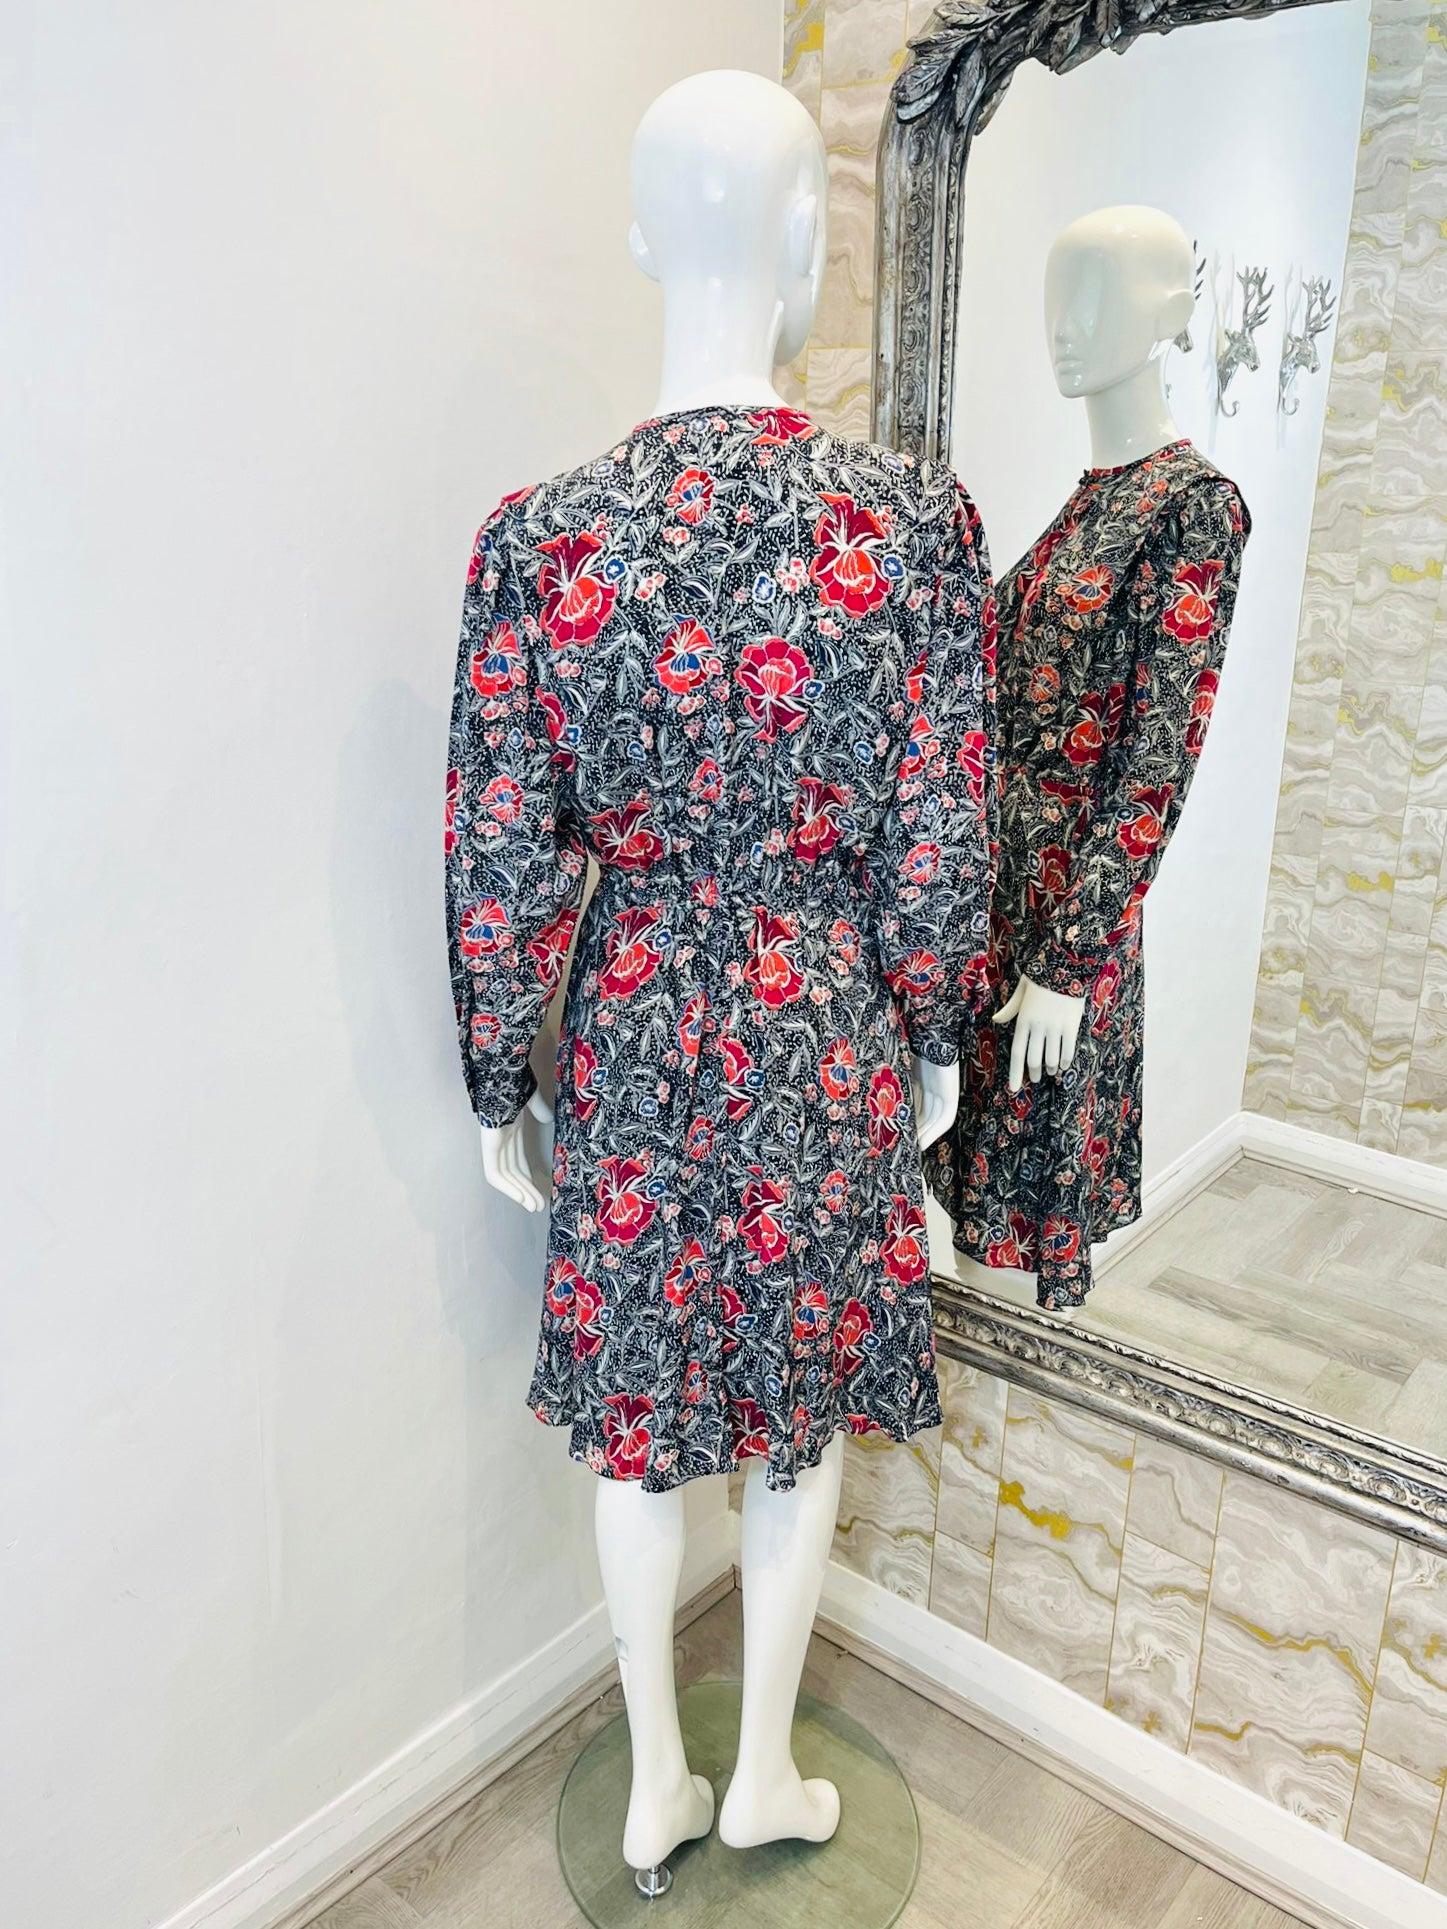 Isabel Marant Etoile Floral Silk Dress In Excellent Condition For Sale In London, GB